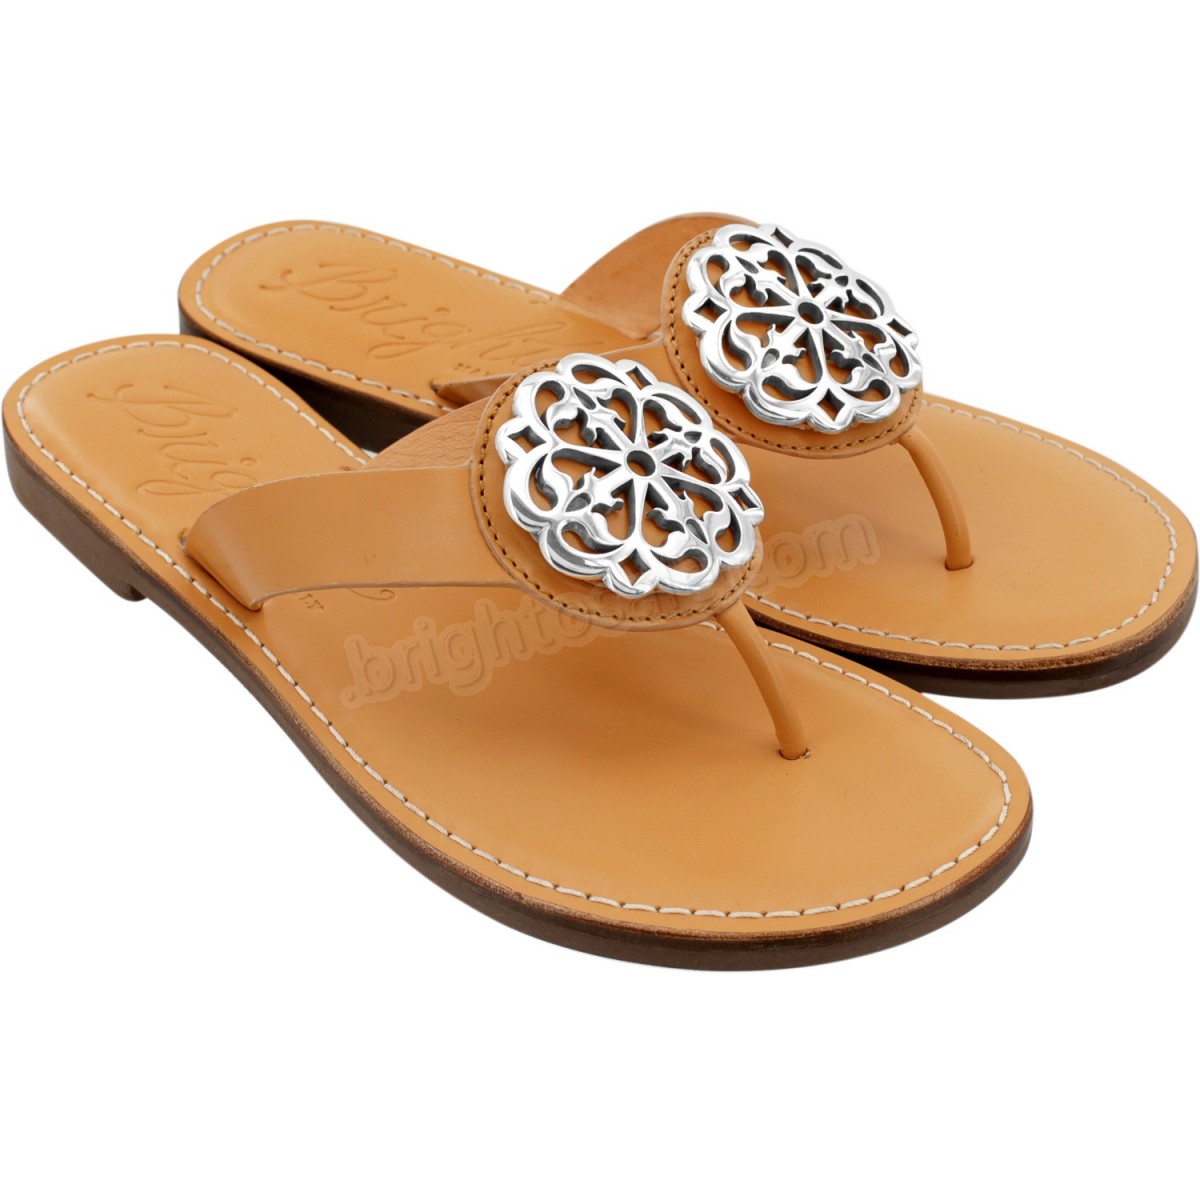 Brighton Collectibles & Online Discount Twine Woven Sandals - -12